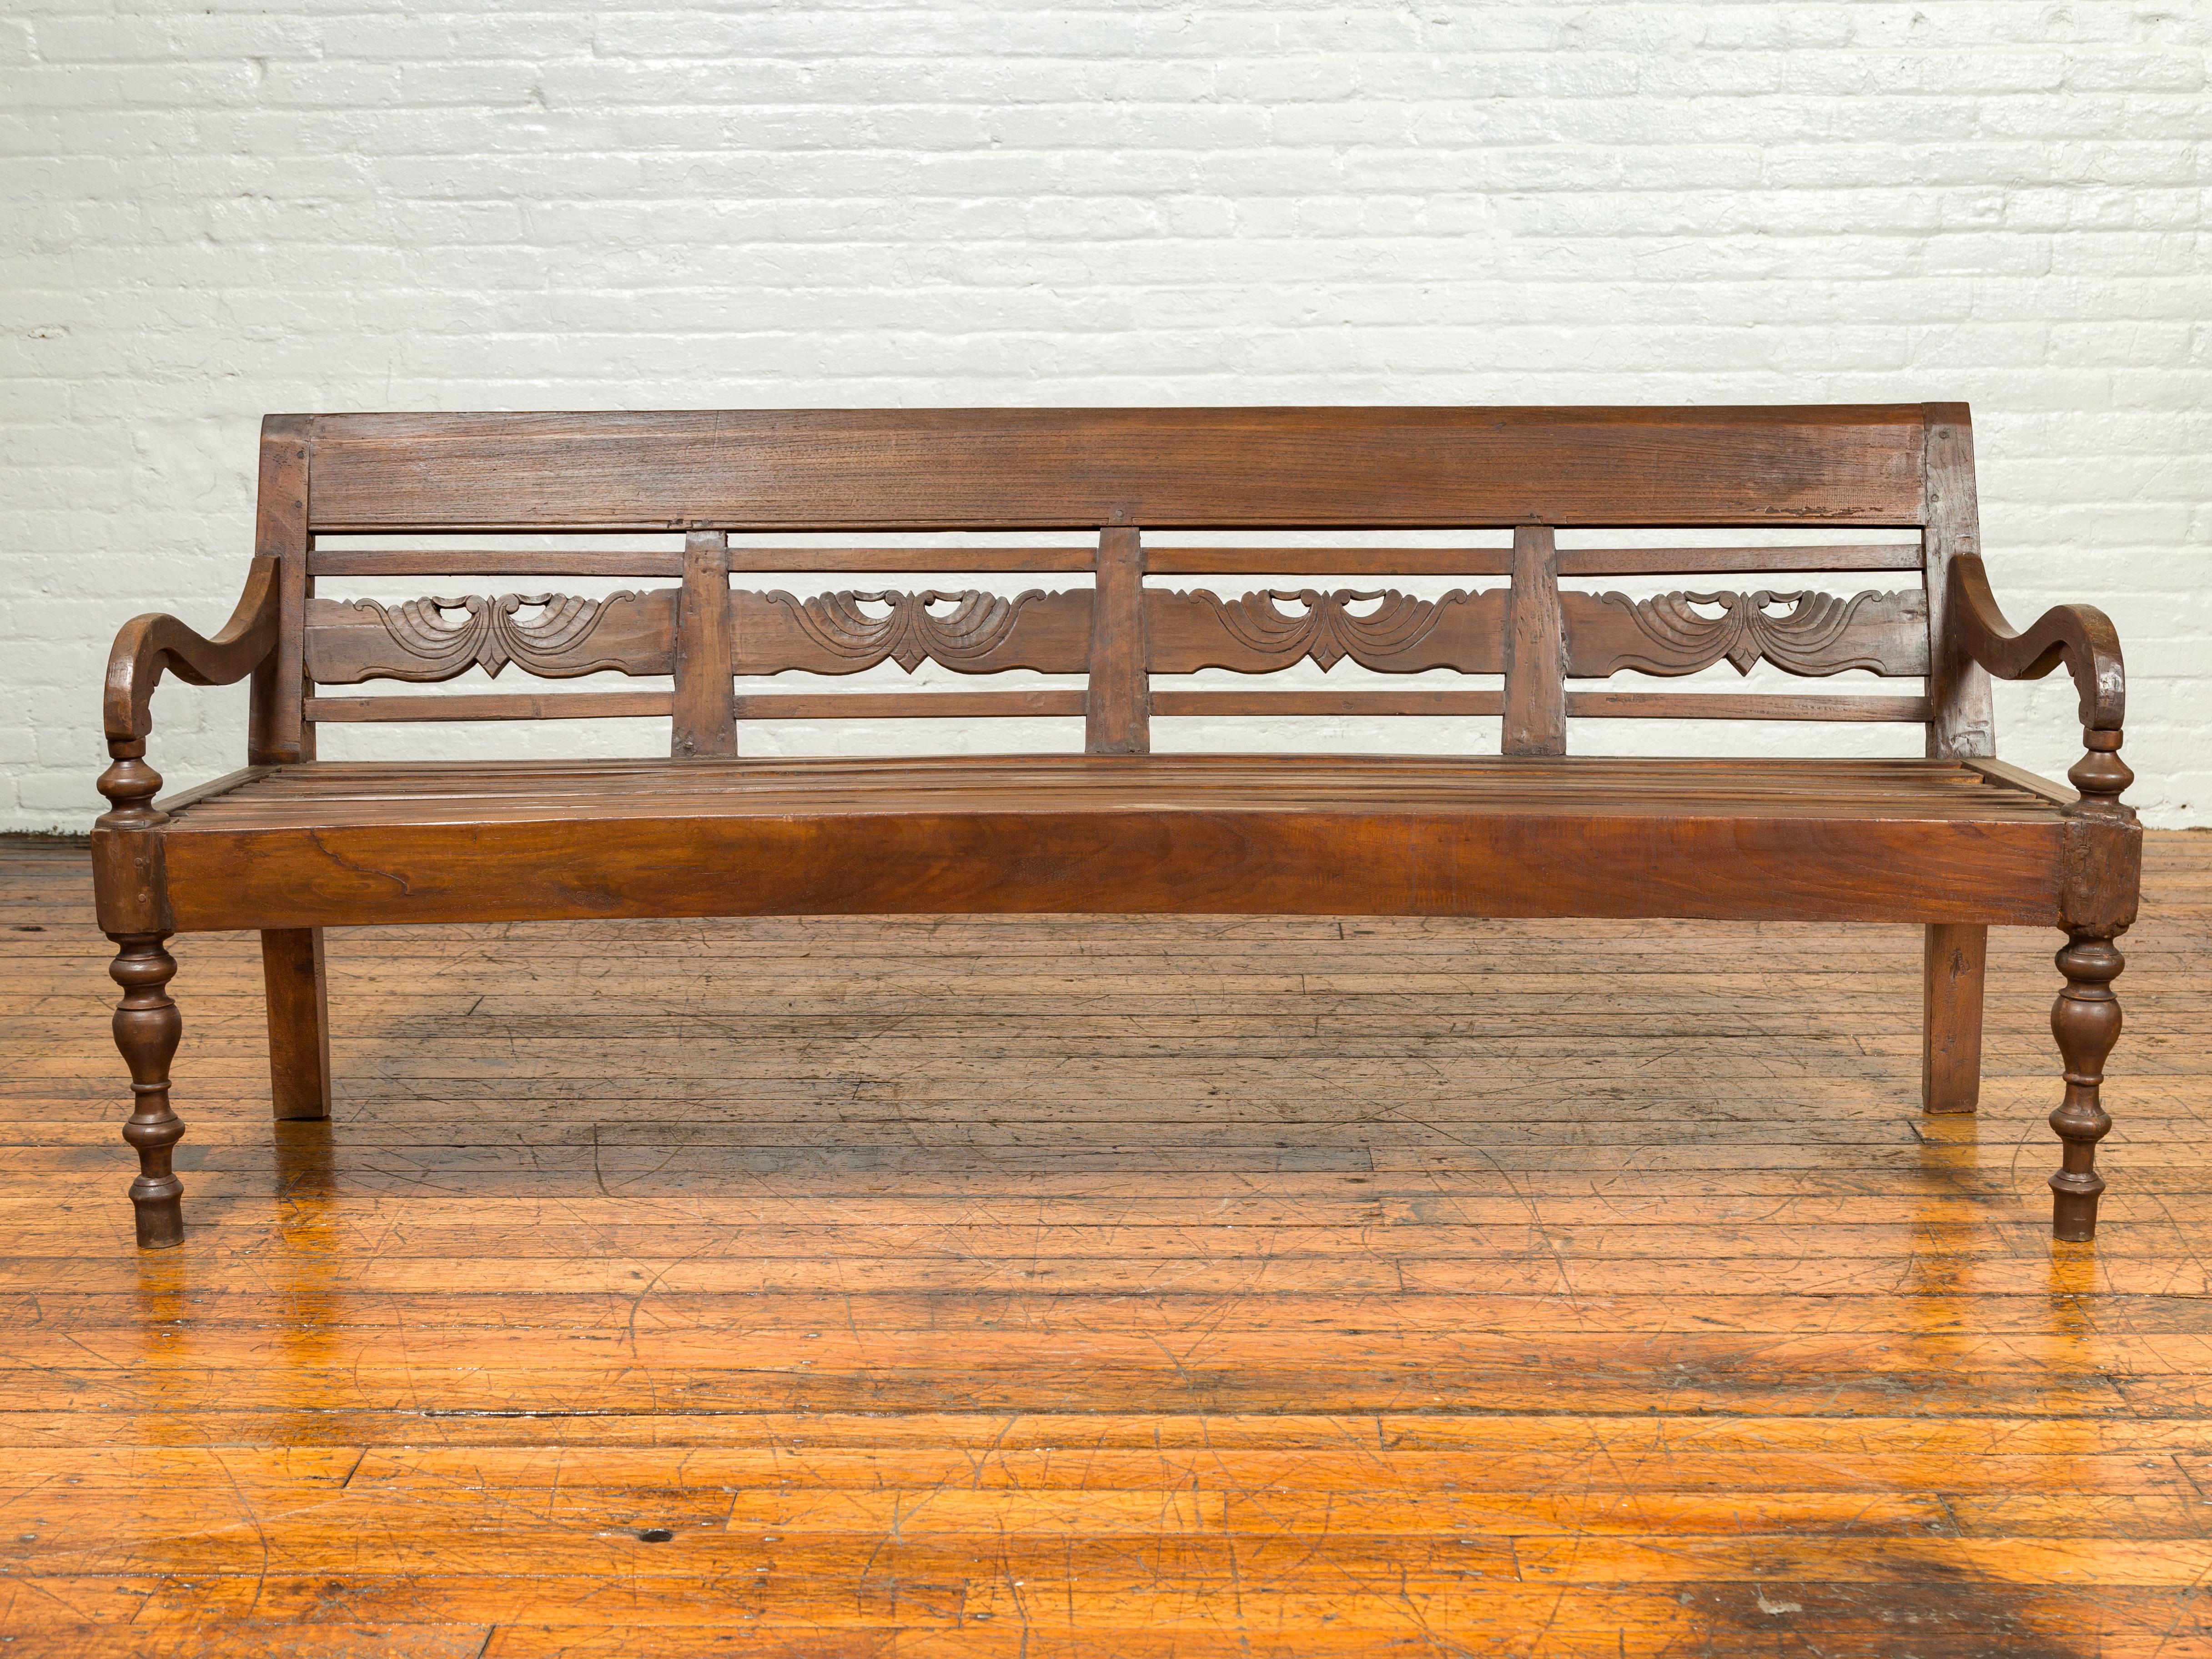 A Dutch Colonial Indonesian wood garden bench from the 19th century, with carved back and scrolling arms. Crafted in Indonesia during the later years of the 19th century, this Dutch Colonial bench features a slanted back carved with scrolling